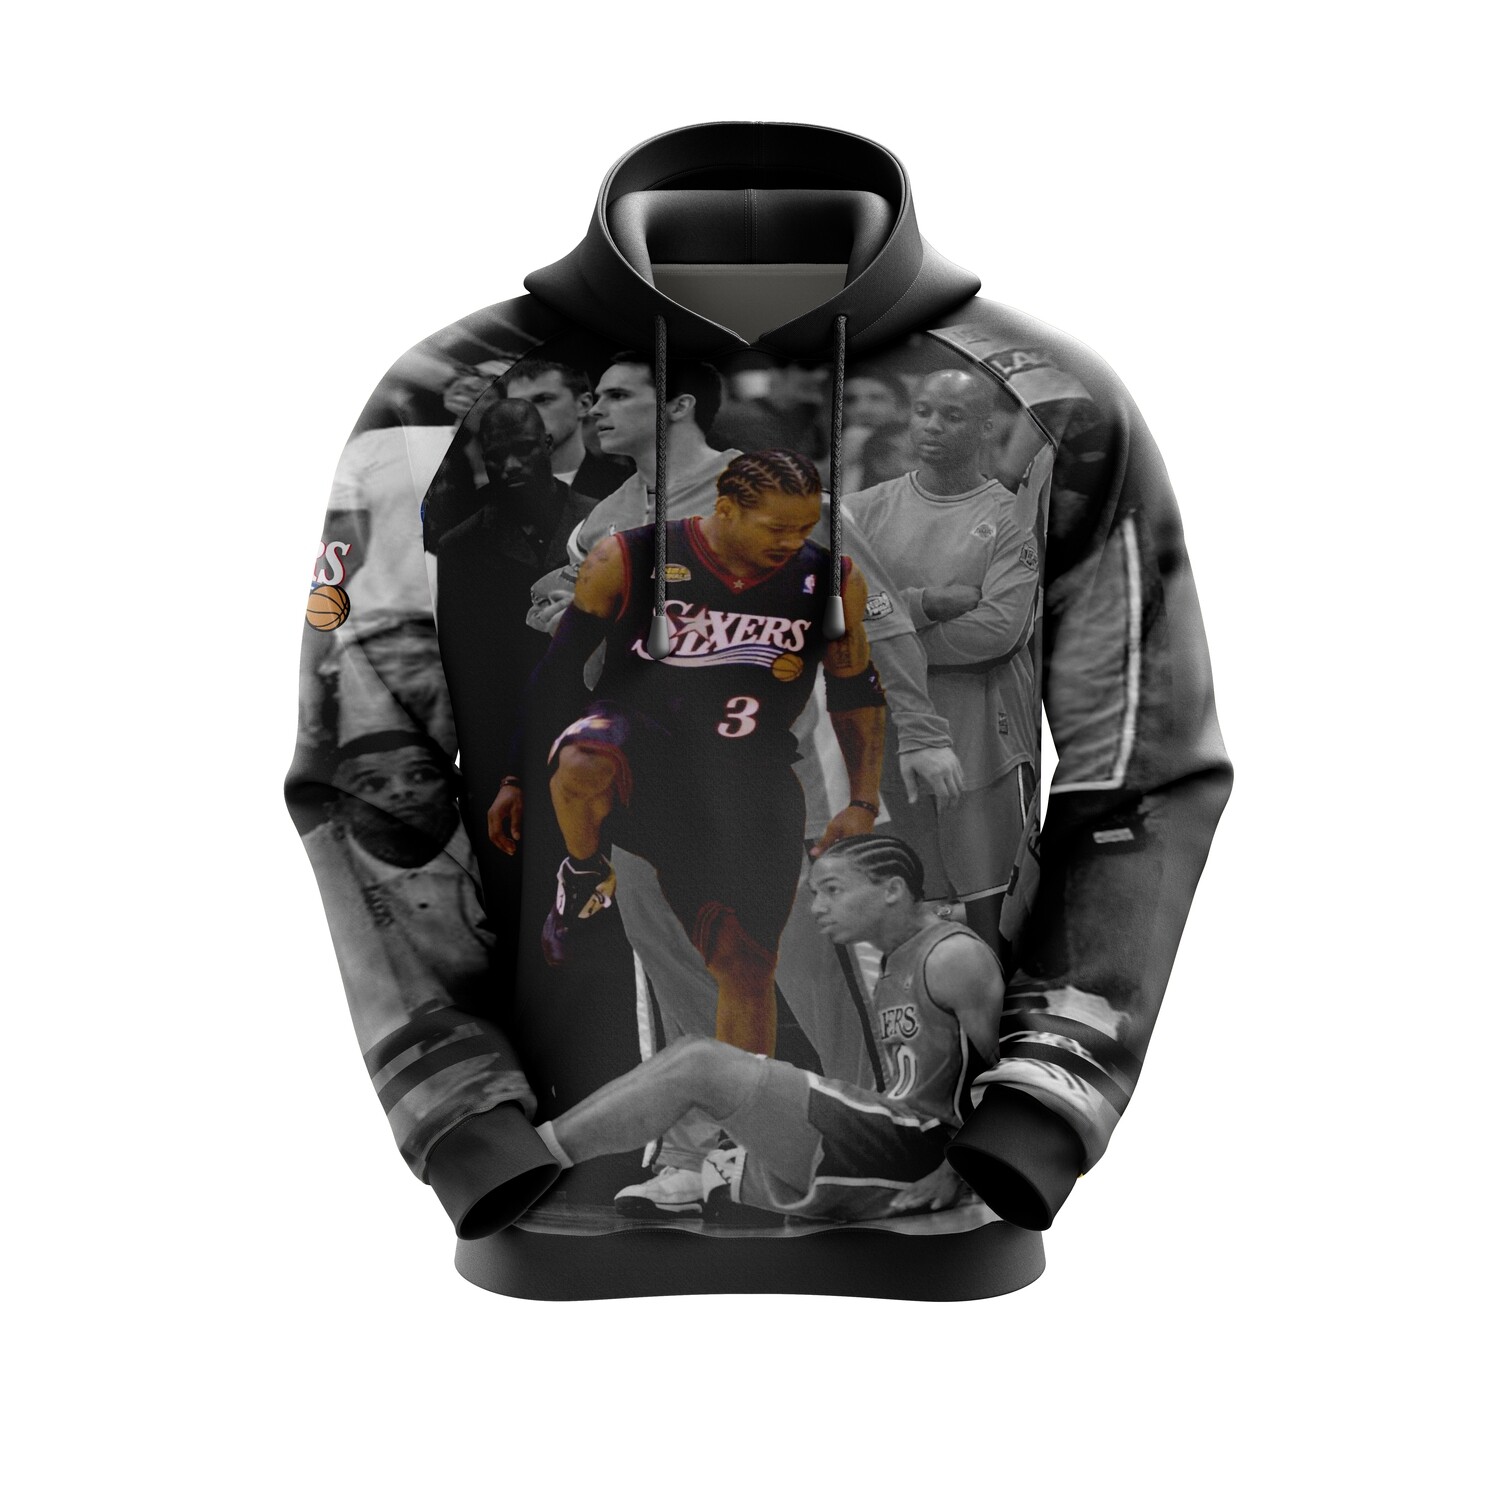 Iverson step over   Full Print Hoodie